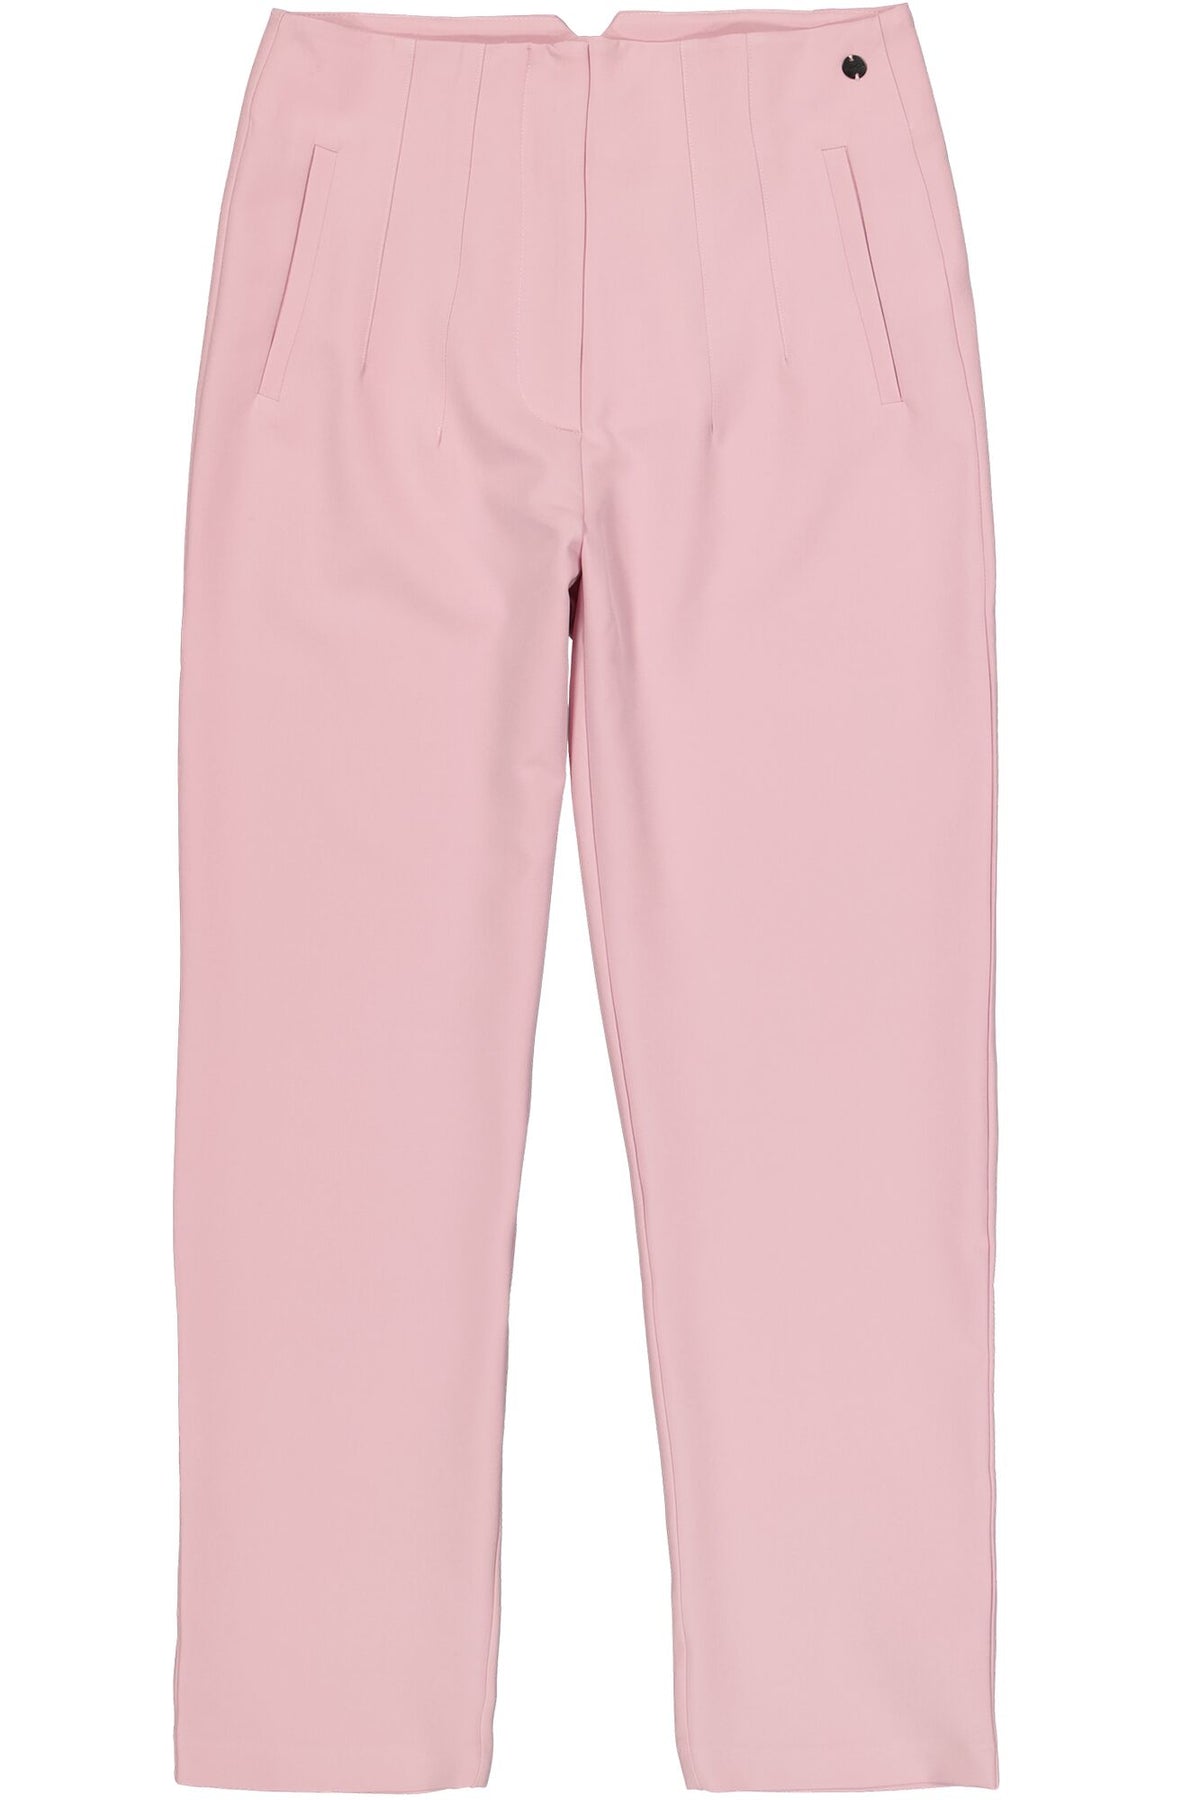 Garcia Fragrant Lilac HighWaisted Cigarette Trousers, C30113